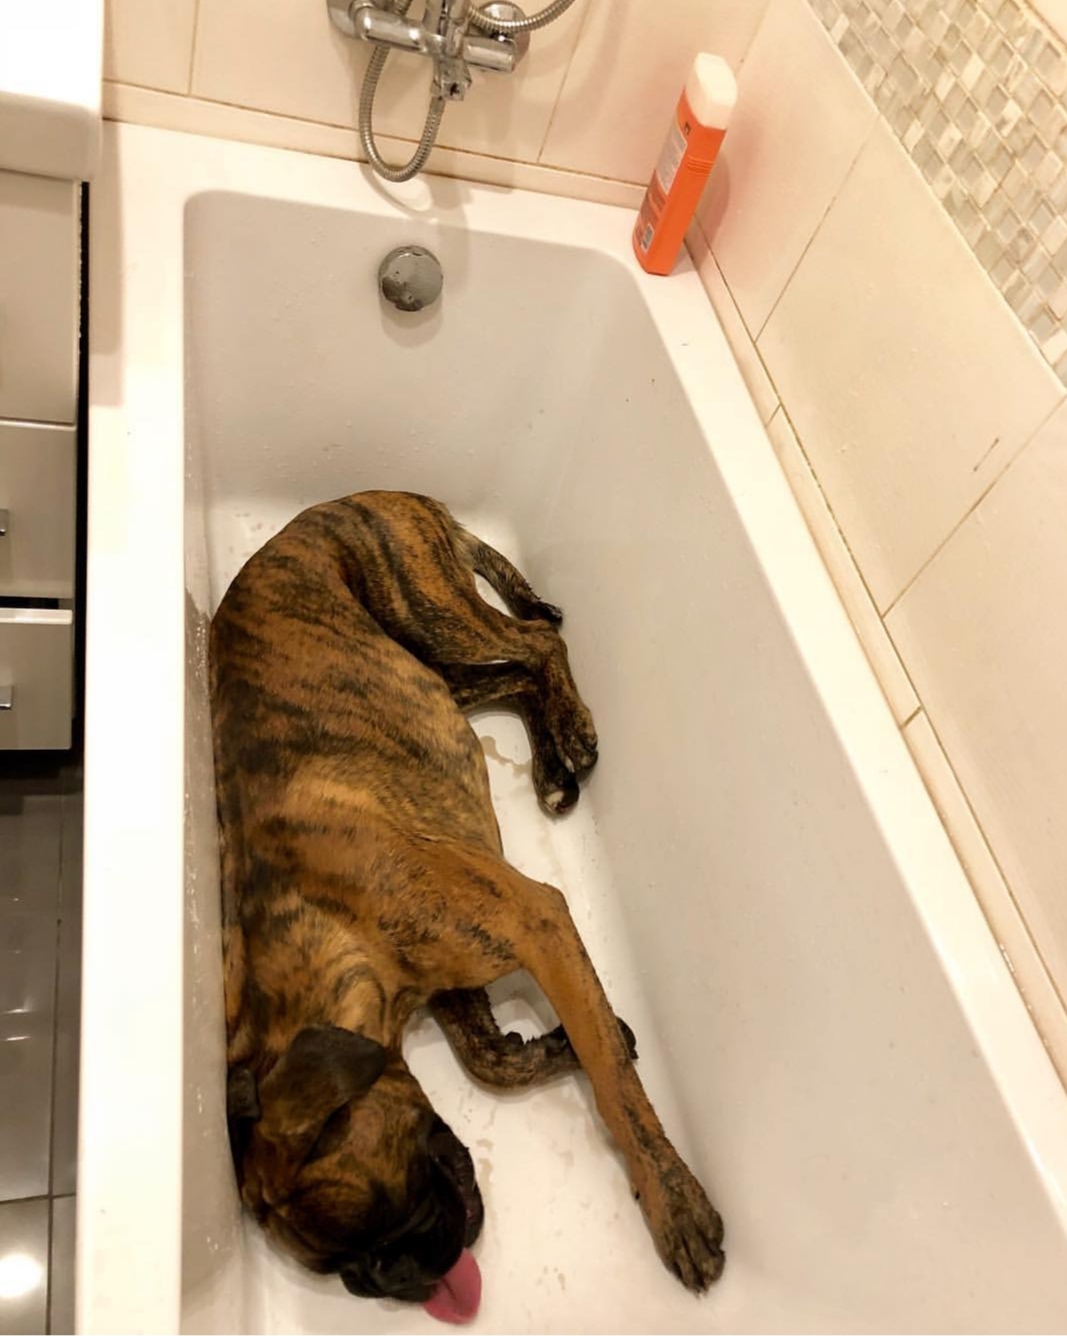 A Boxer sleeping in the bathtub with its tongue out